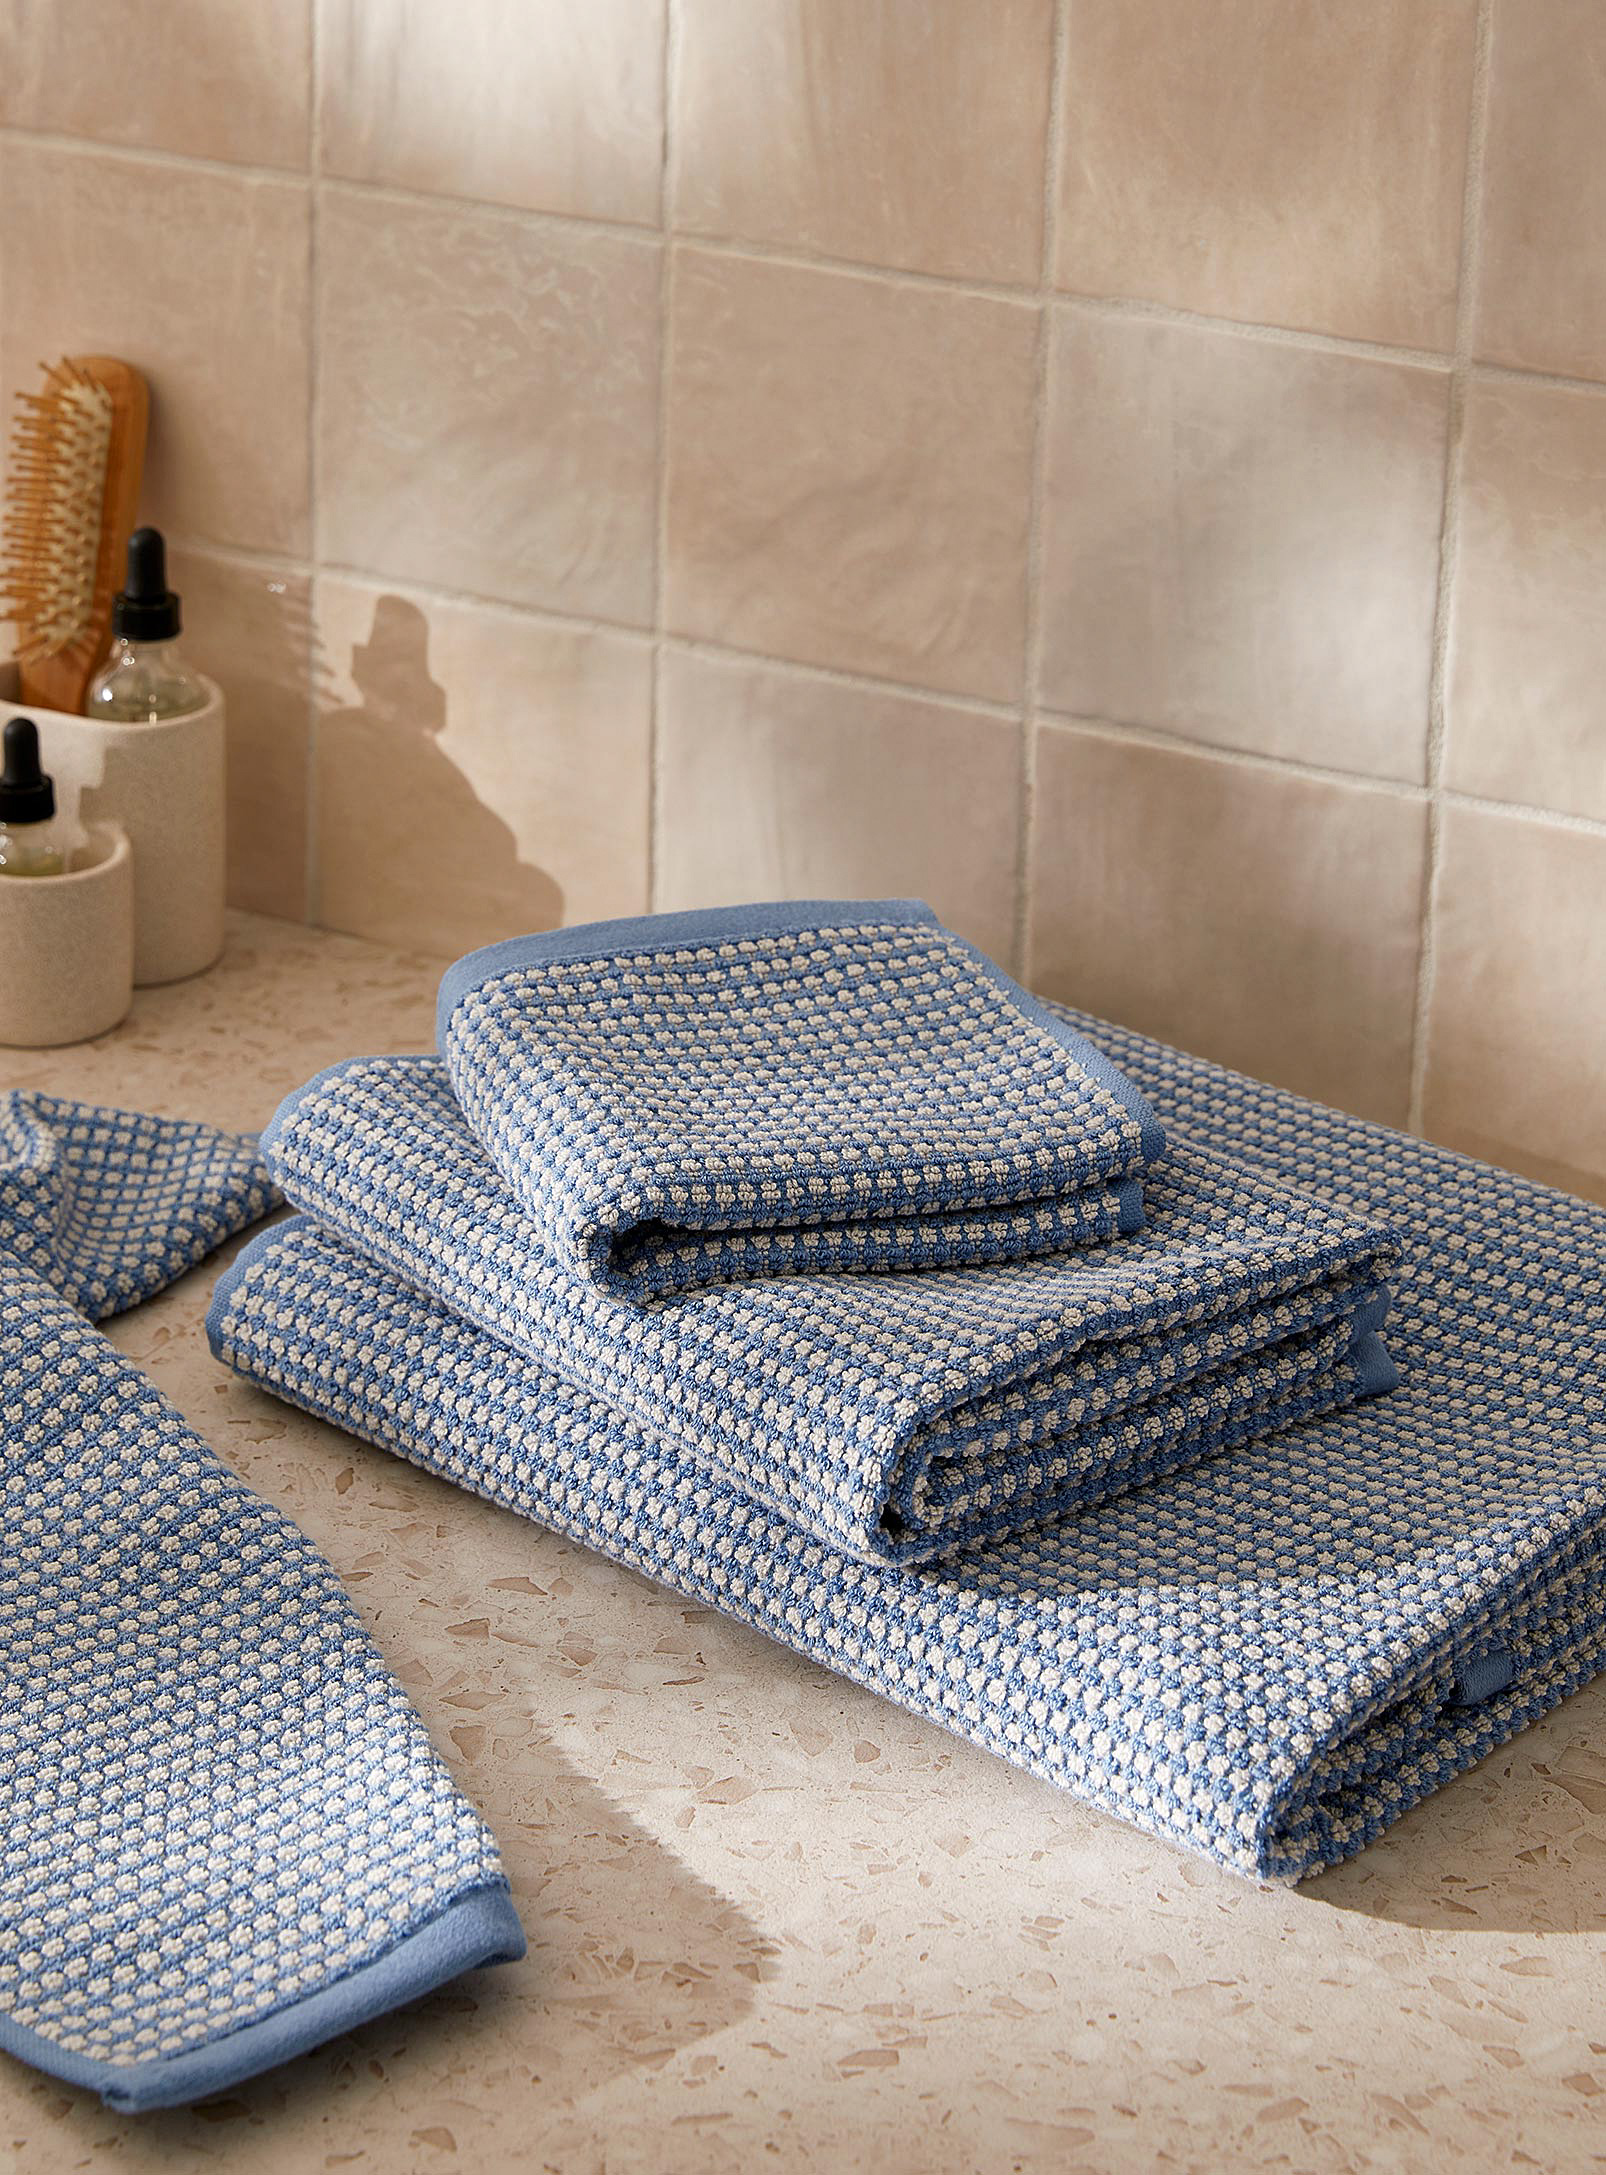 Simons Maison Retro Blue Dotted Cotton Towels In Patterned Blue